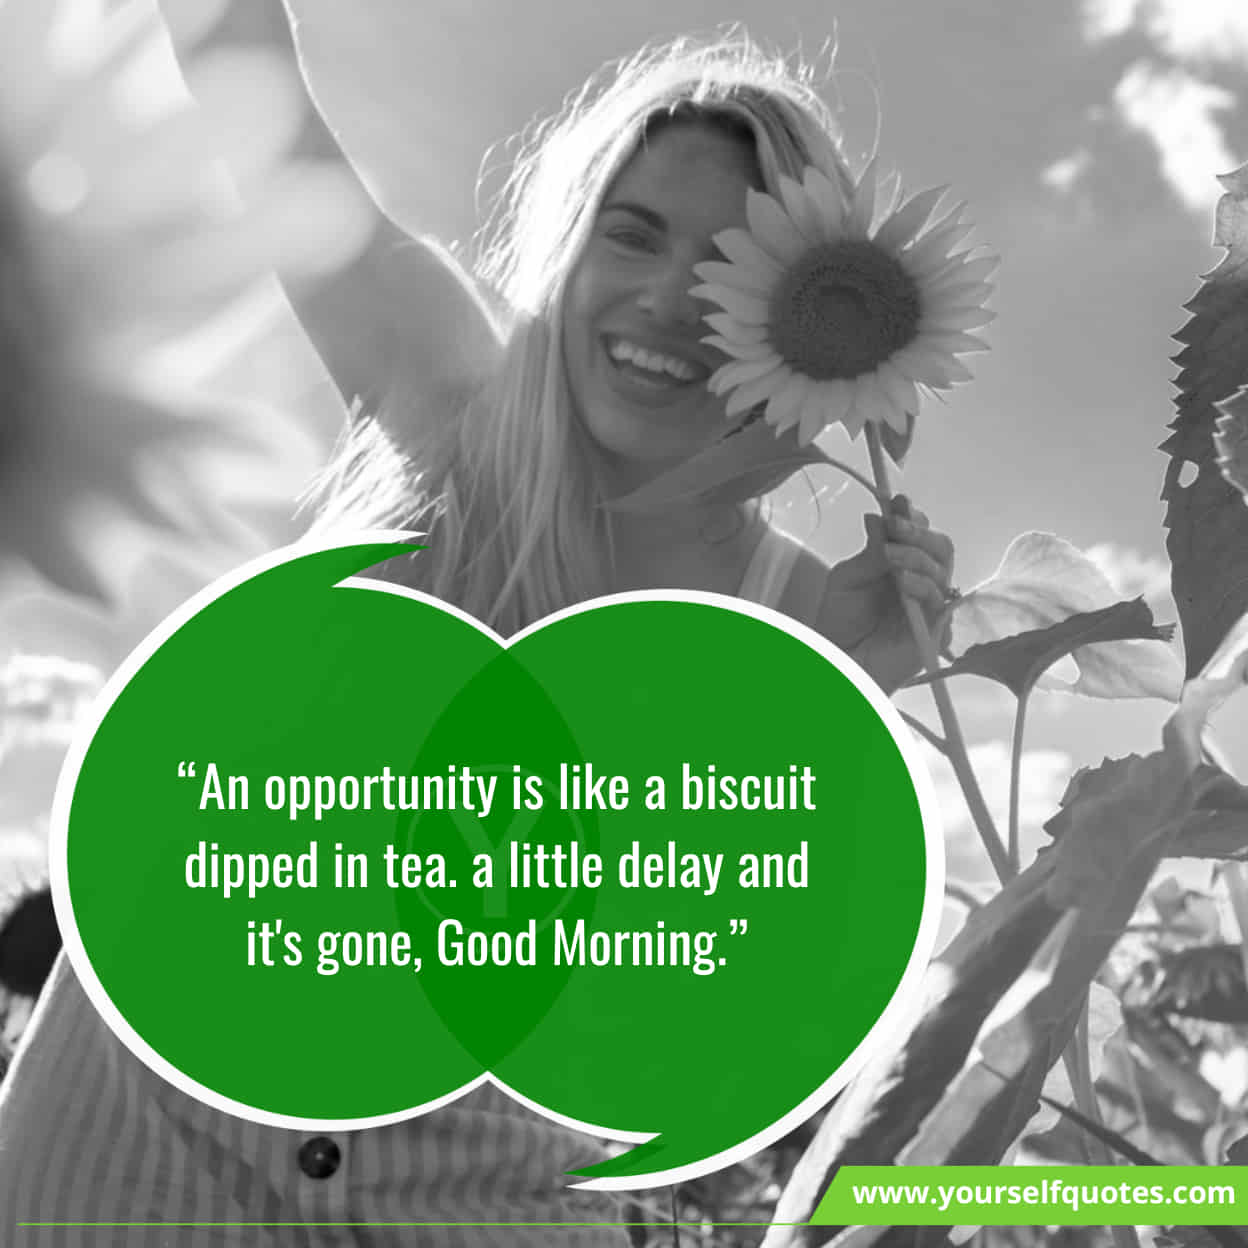 Best Good Morning Quotes, Wishes, Messages & Status